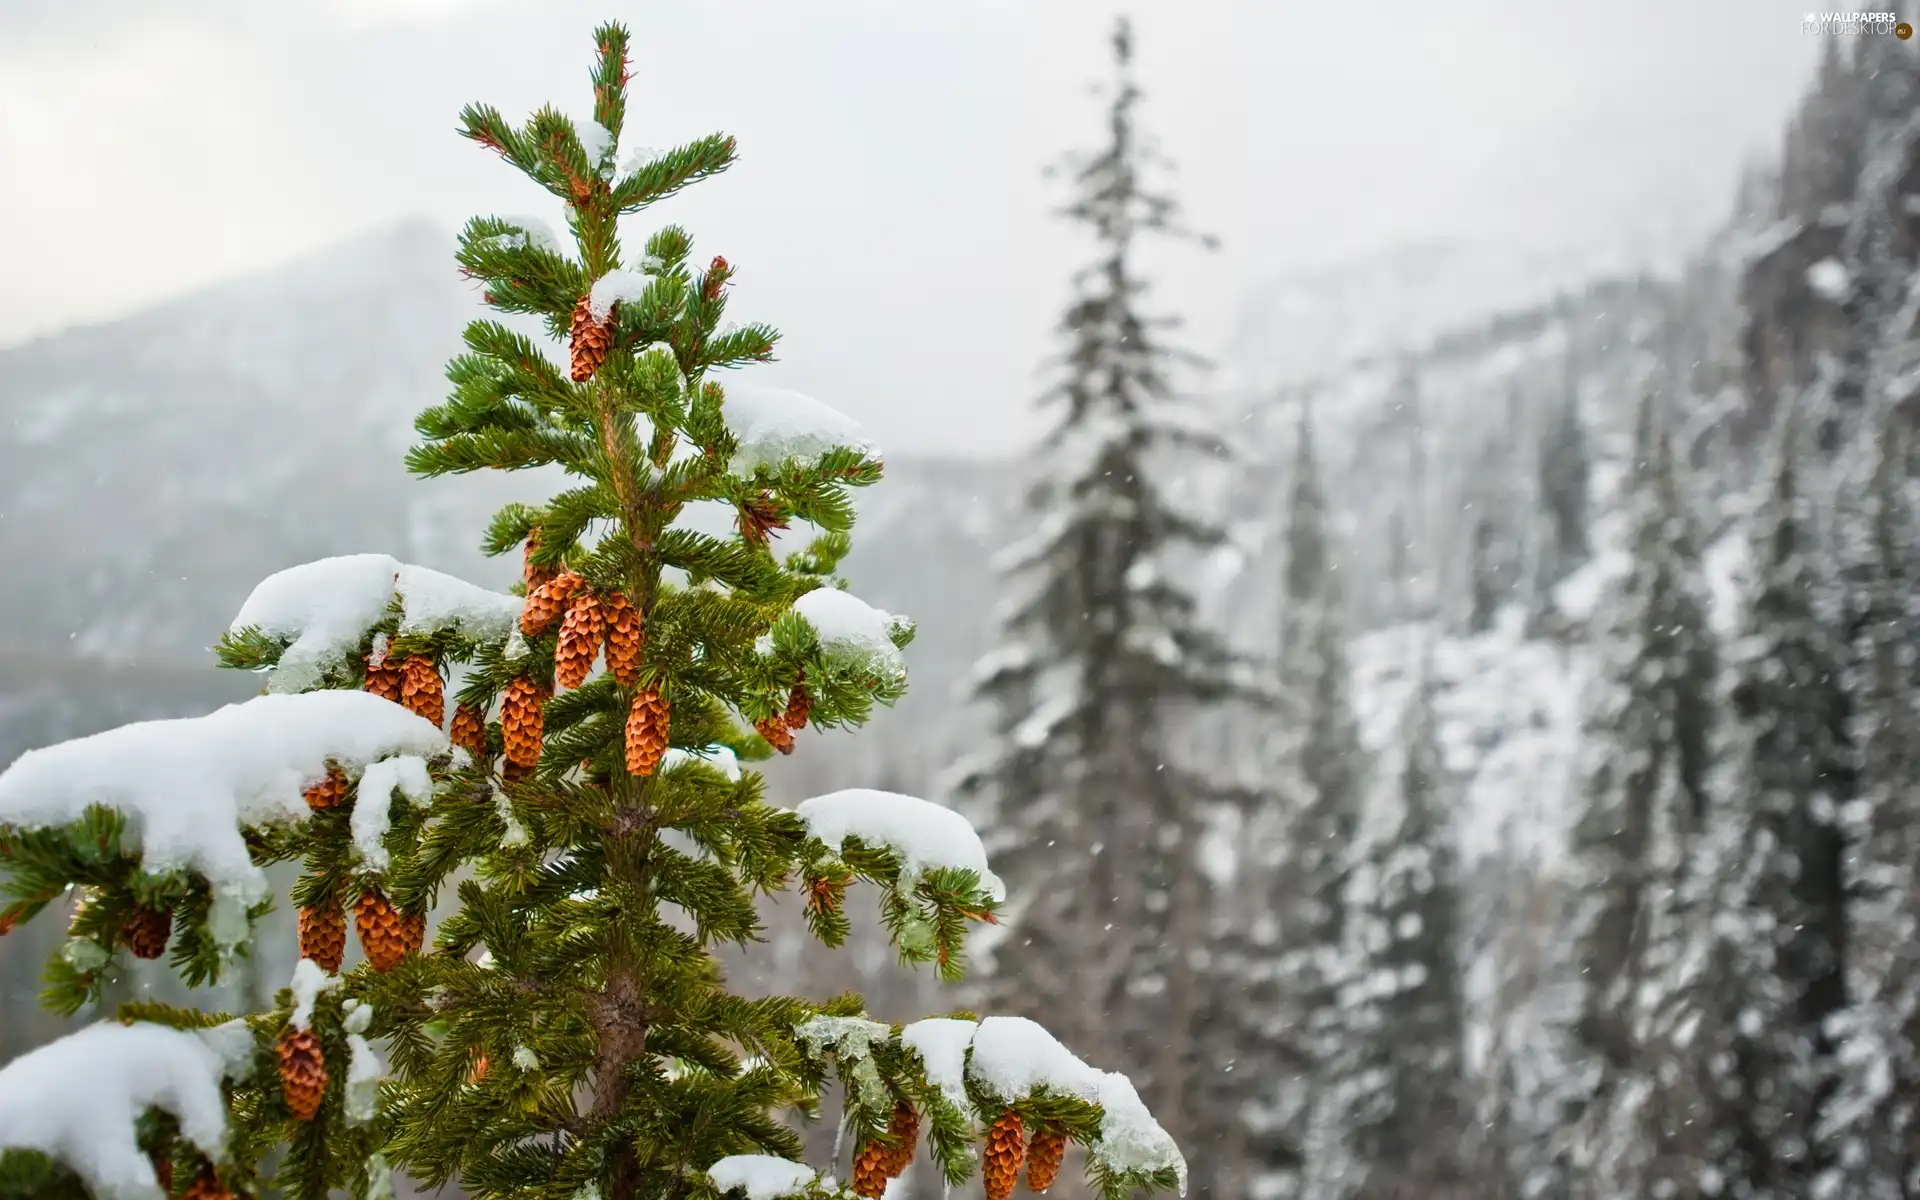 Mountains, Spruces, cones, snow